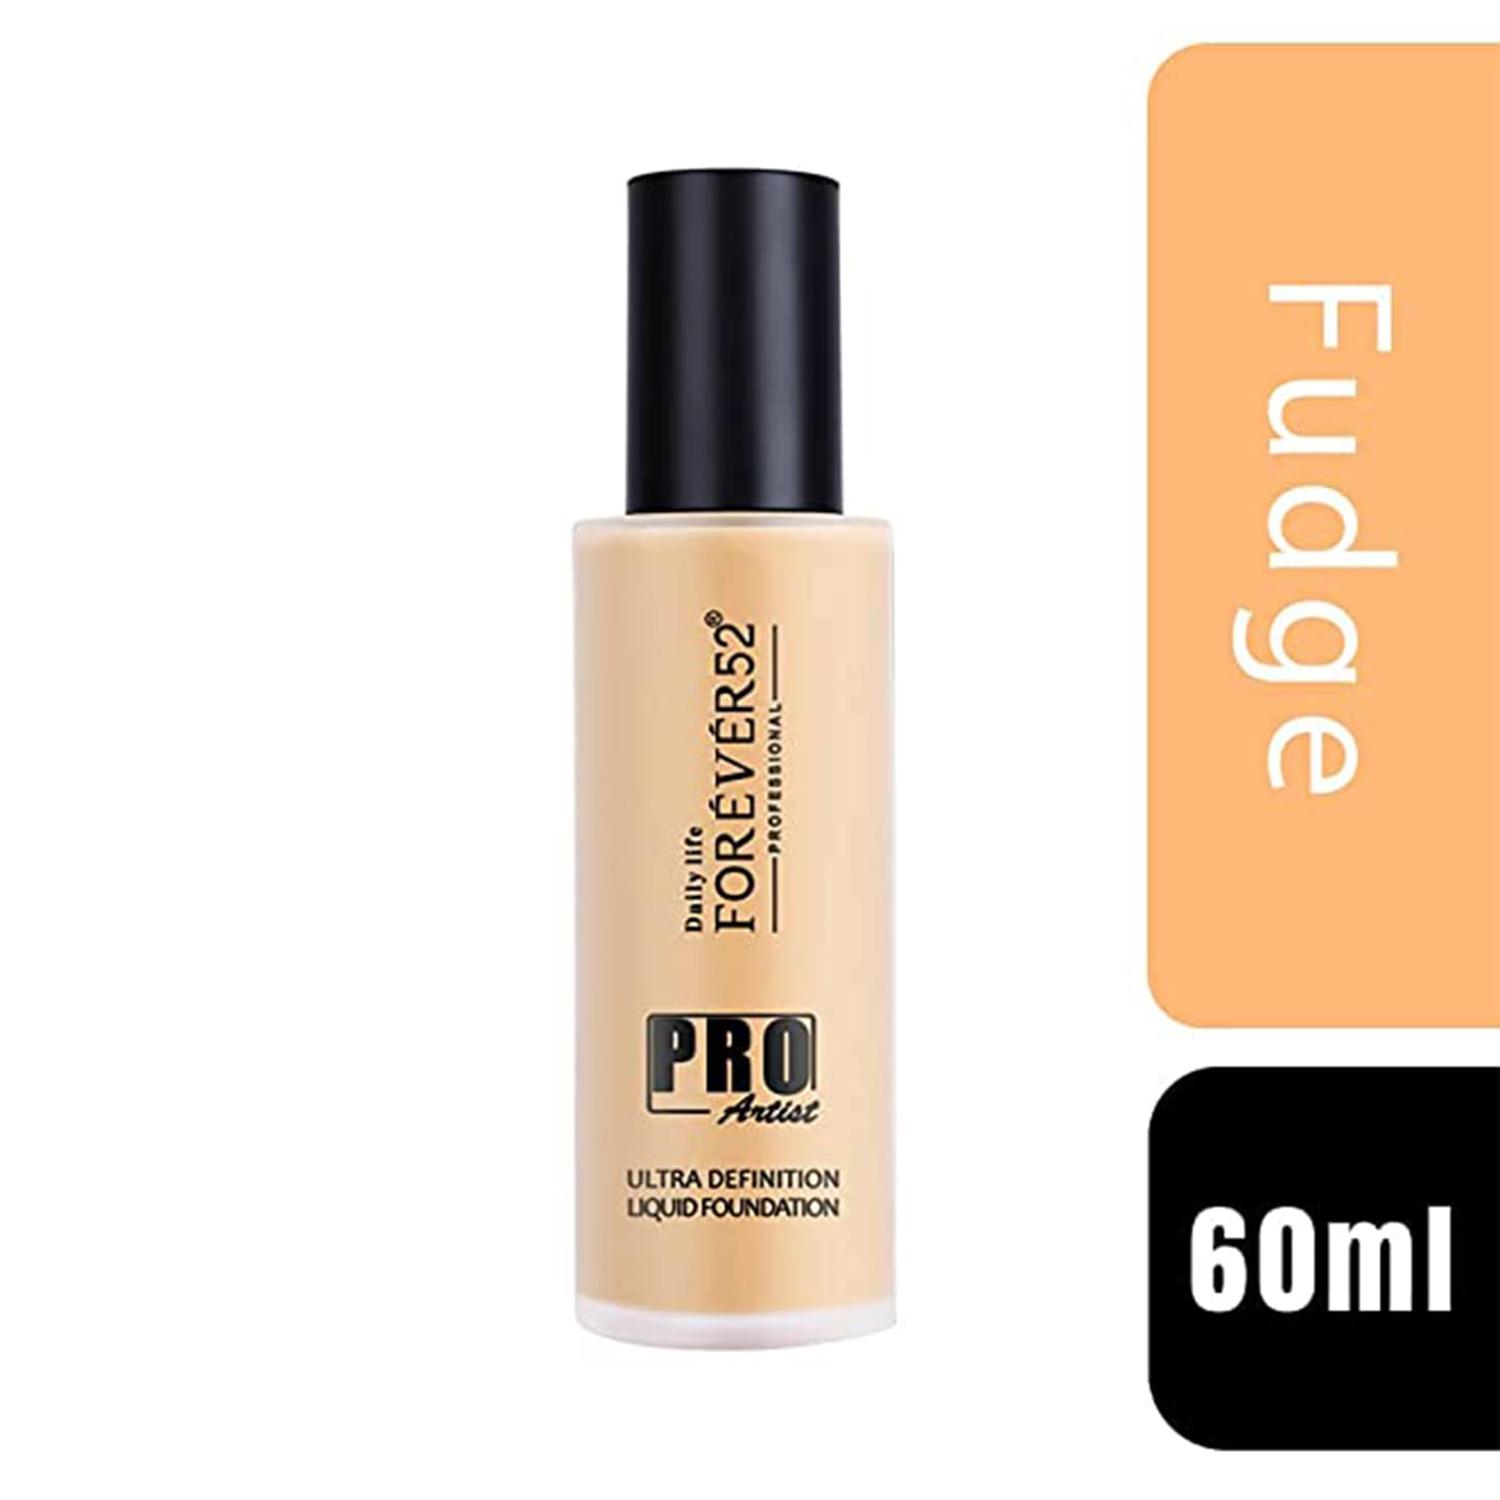 Daily Life Forever52 | Daily Life Forever52 Pro Artist Ultra Definition Liquid Foundation - Fudge (60ml)